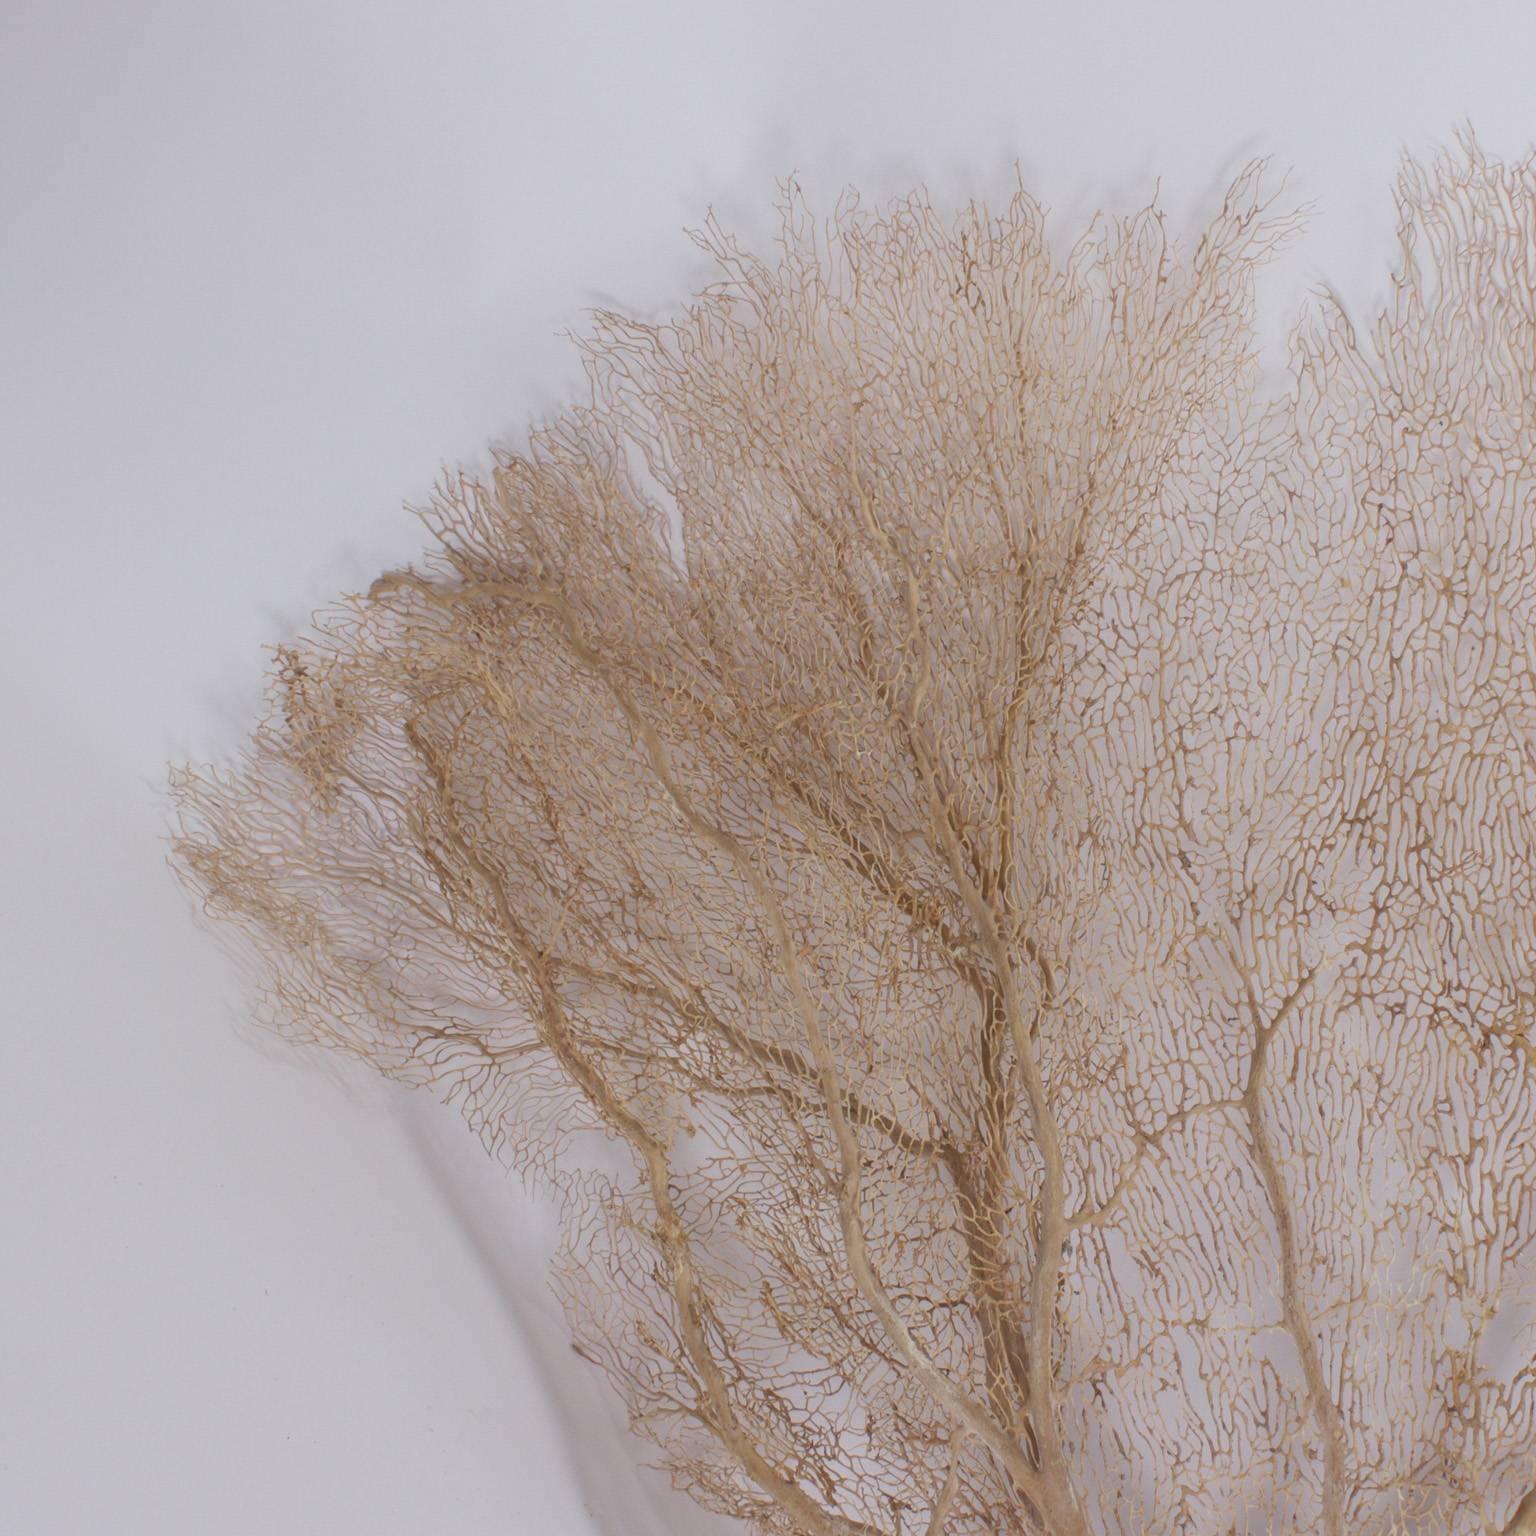 The genius of Mother Nature is on grand display here in a familiar soft coral tree like structure. This sea fan is an inspired sculpture with an easy to appreciate organic color and texture. Six available.